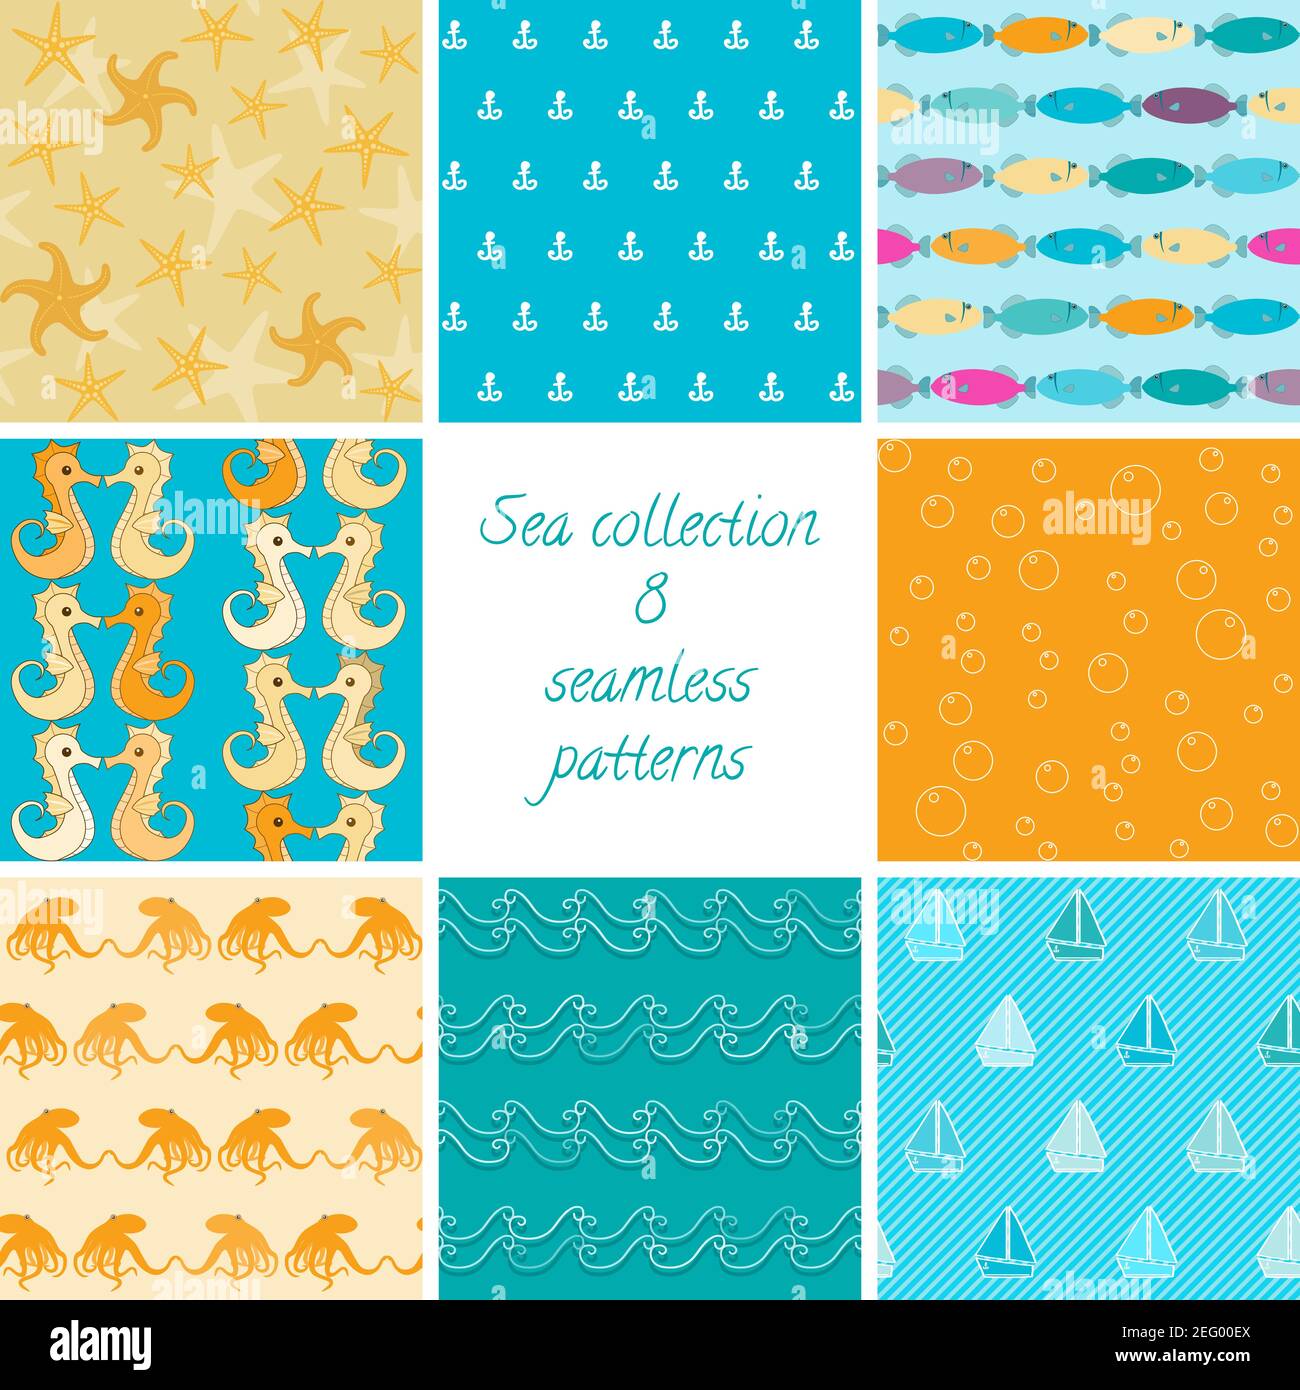 Colorful collection of 8 marine seamless patterns Stock Vector